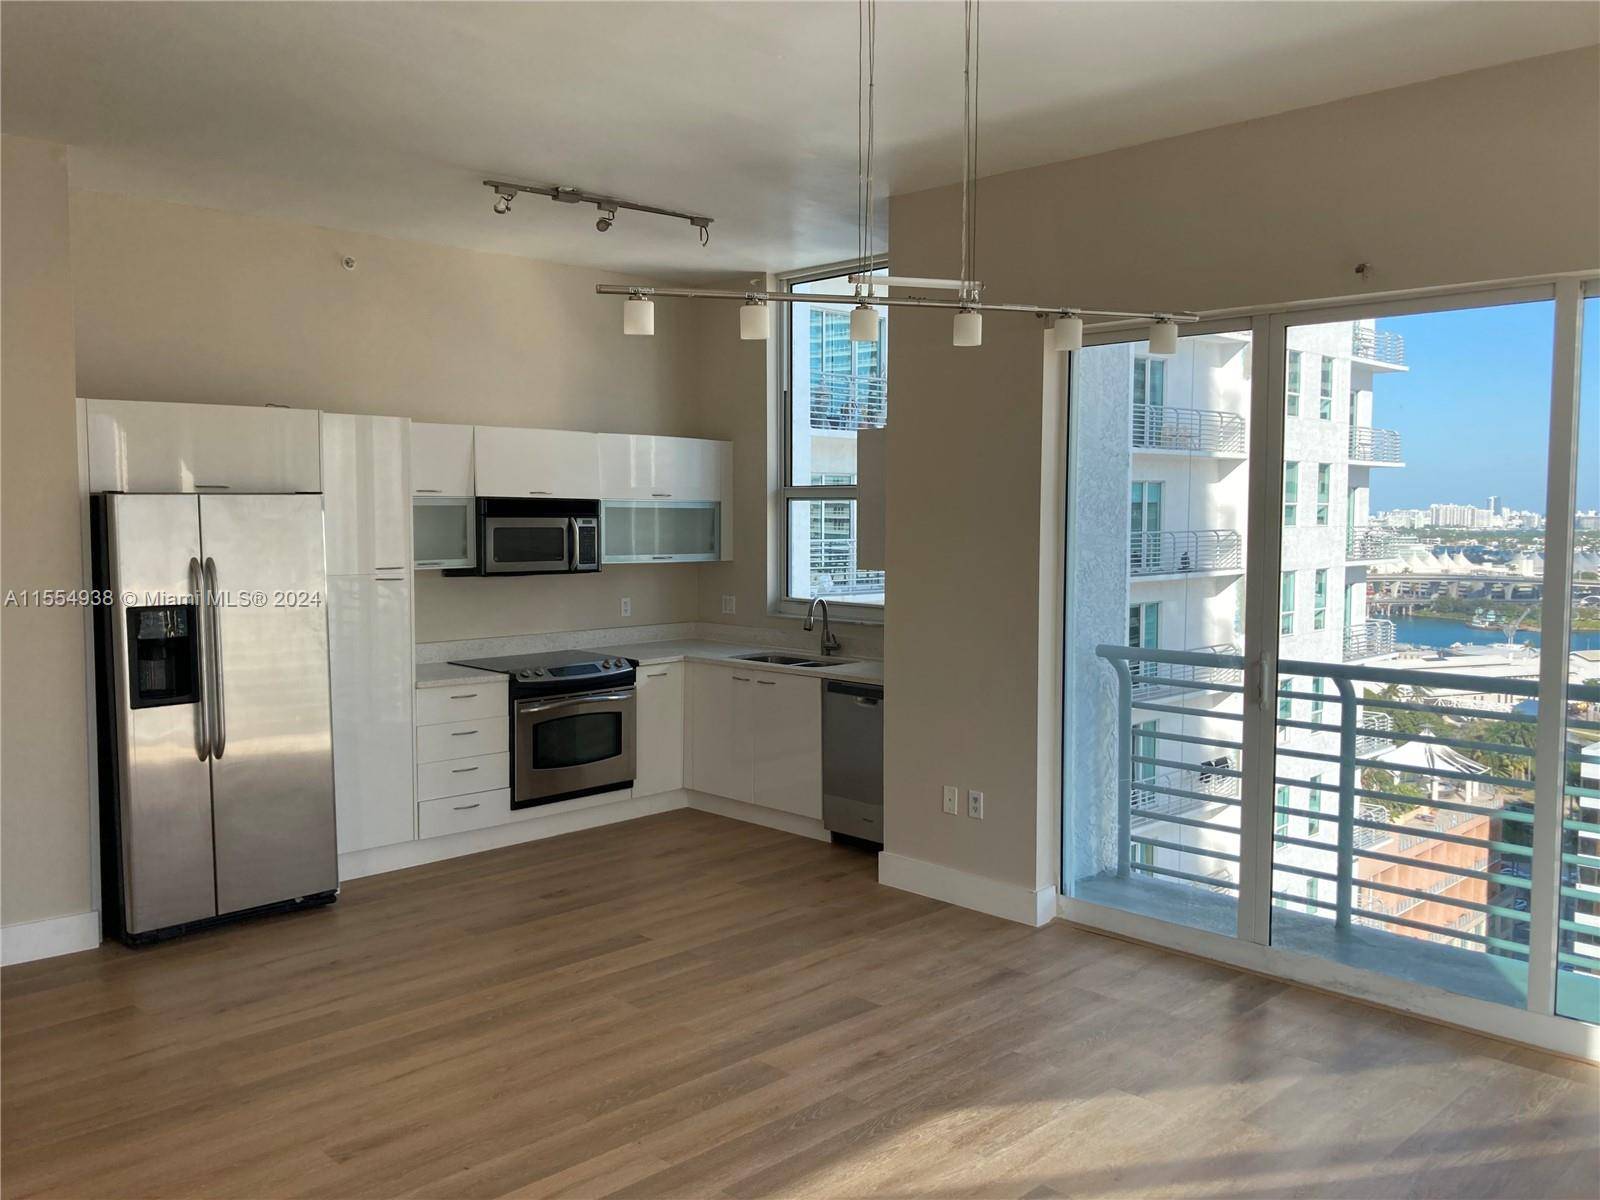 Stunning views from this spacious corner 2 2 in Downtown Miami with 10 ft ceiling, both bedrooms are ENCLOSED, stainless steel appliances, in unit washer dryer and Italian kitchen laminate ...